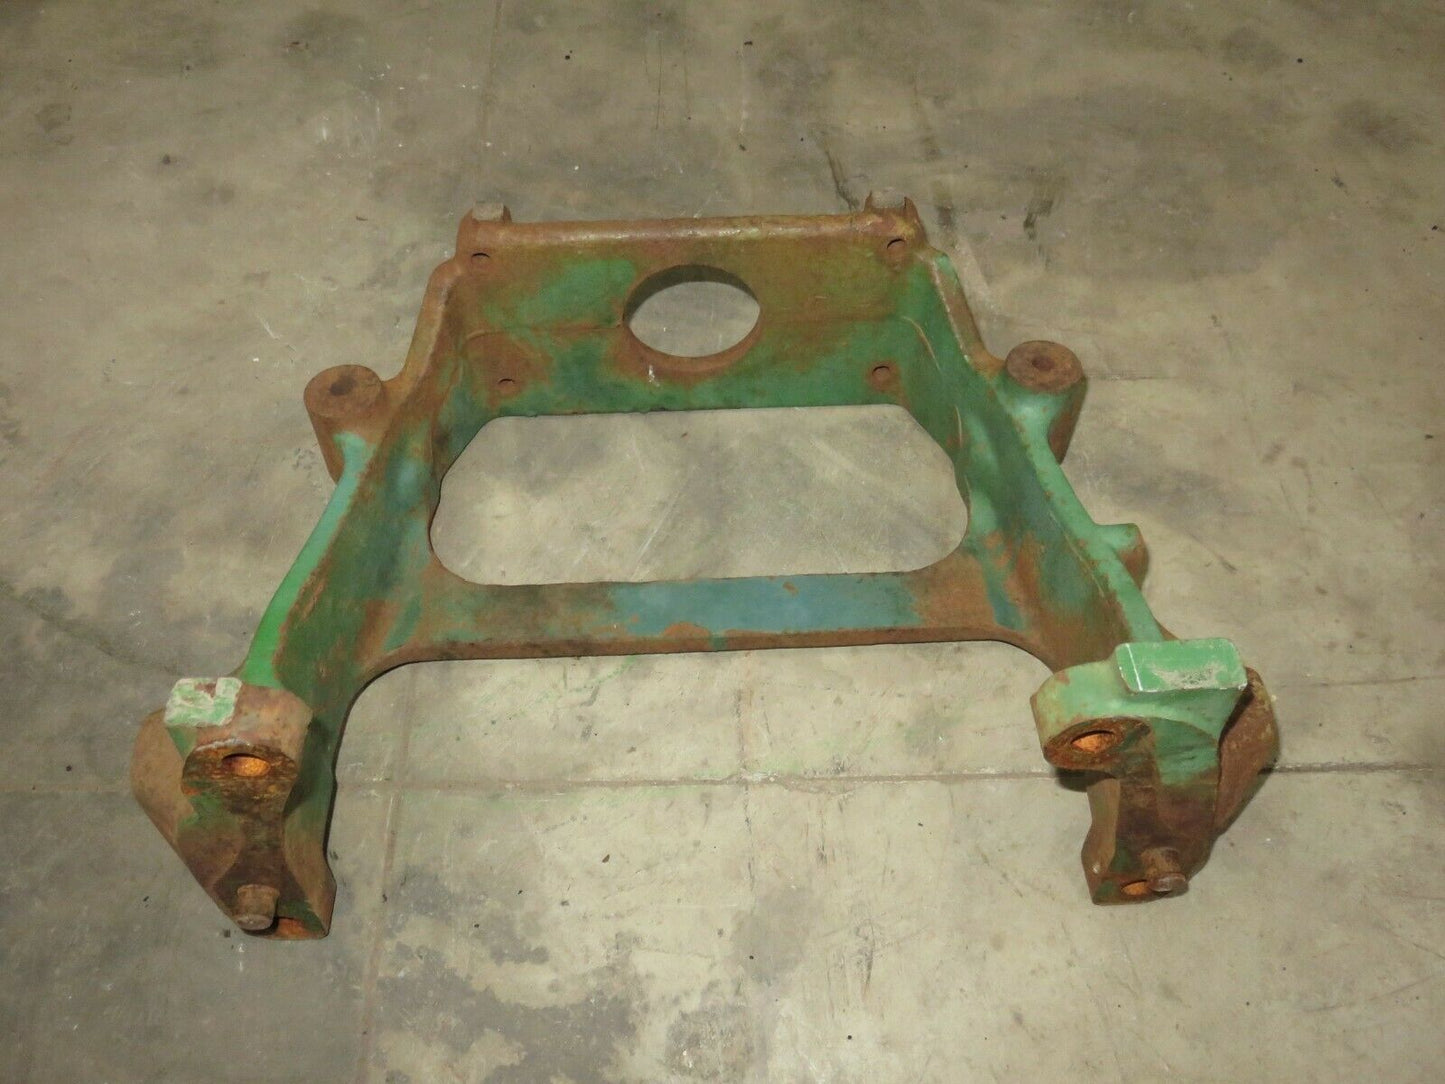 R38084 John Deere Front Hydraulic Pump Support For 2510, 2520